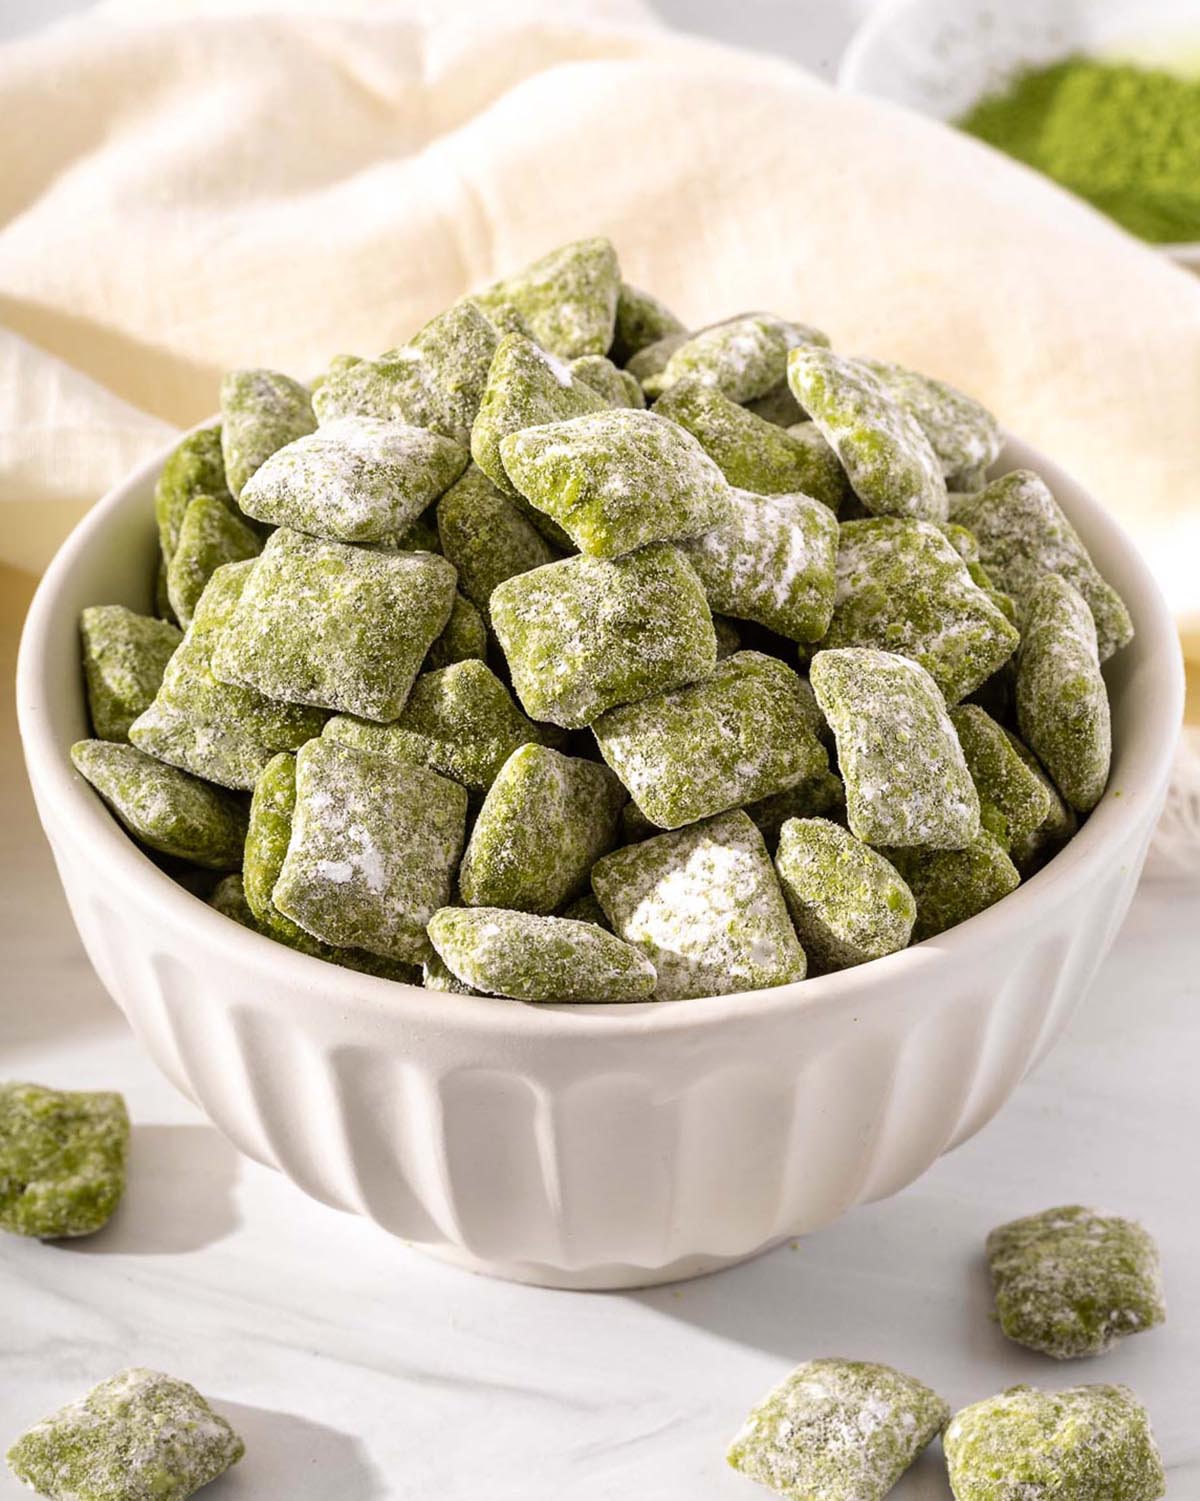 A bowl overflowing with green puppy chow.